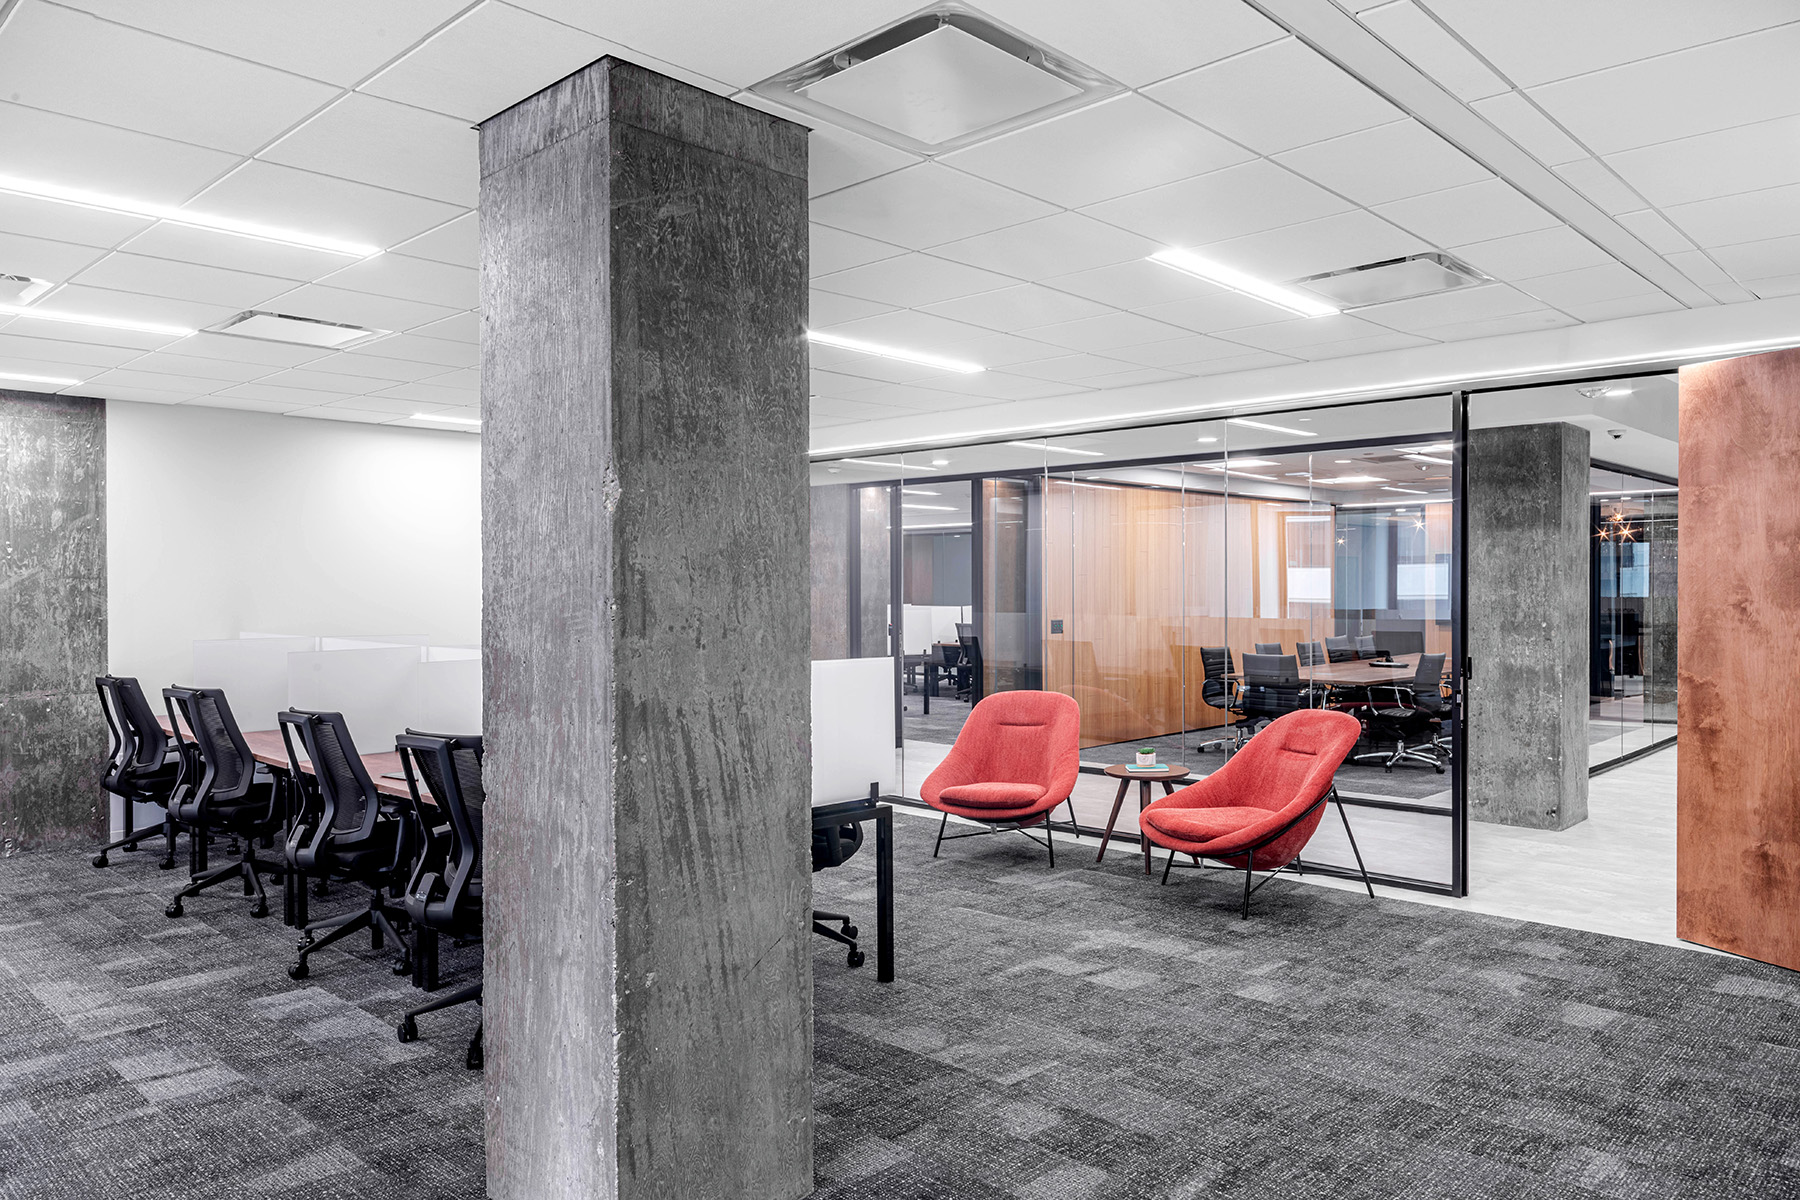 Linear recessed lights fitted in a grid ceiling light a communal workspace and social area.
